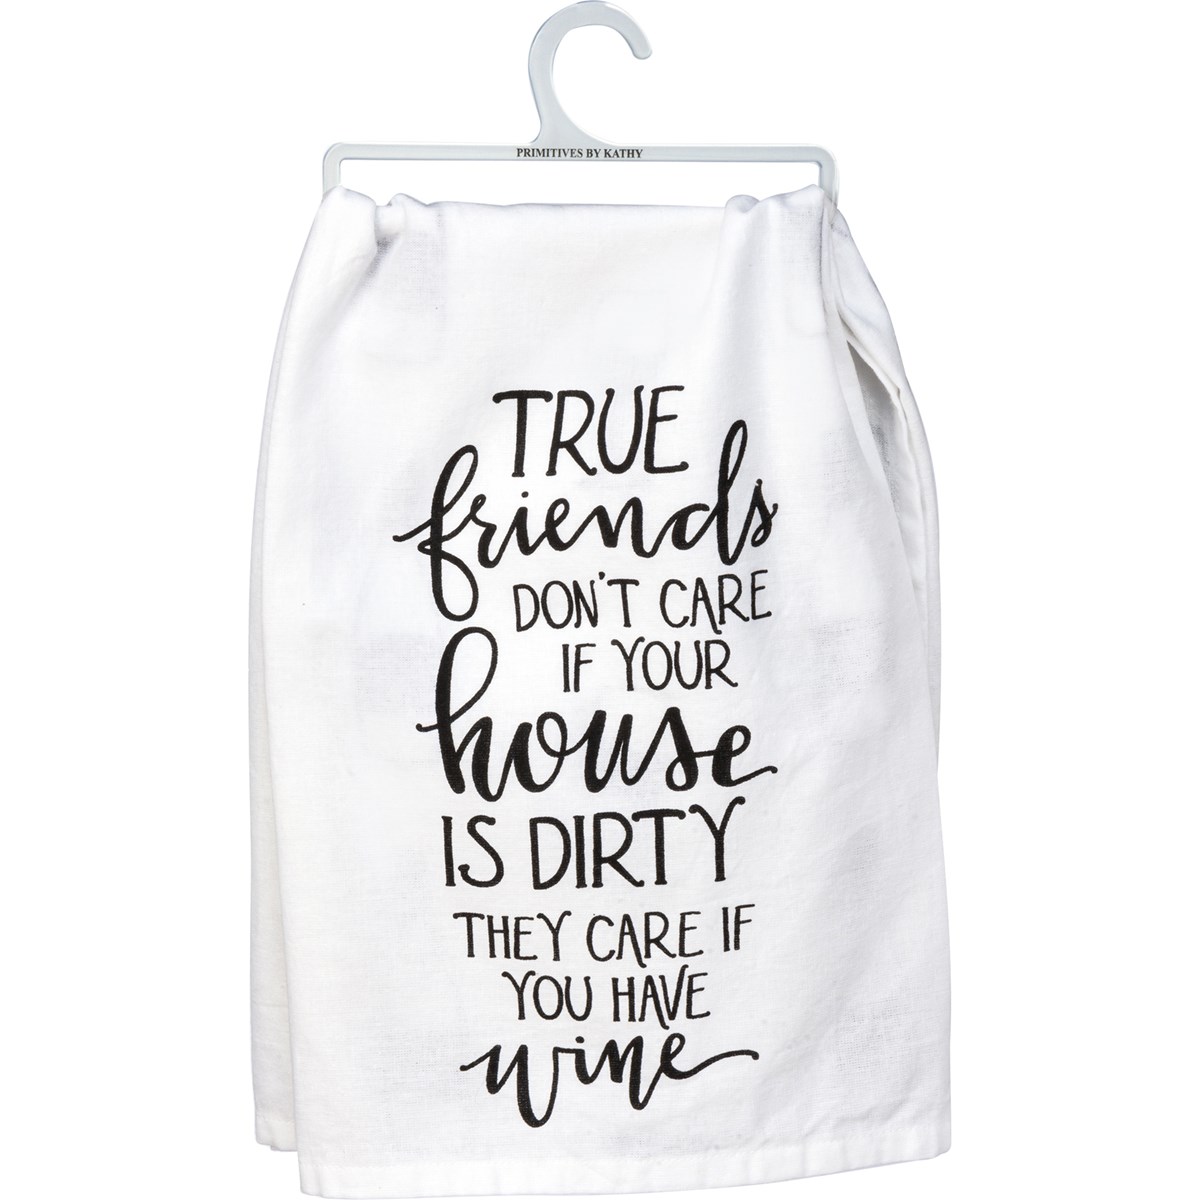 True Friends Care If You Have Wine Kitchen Towel - Cotton